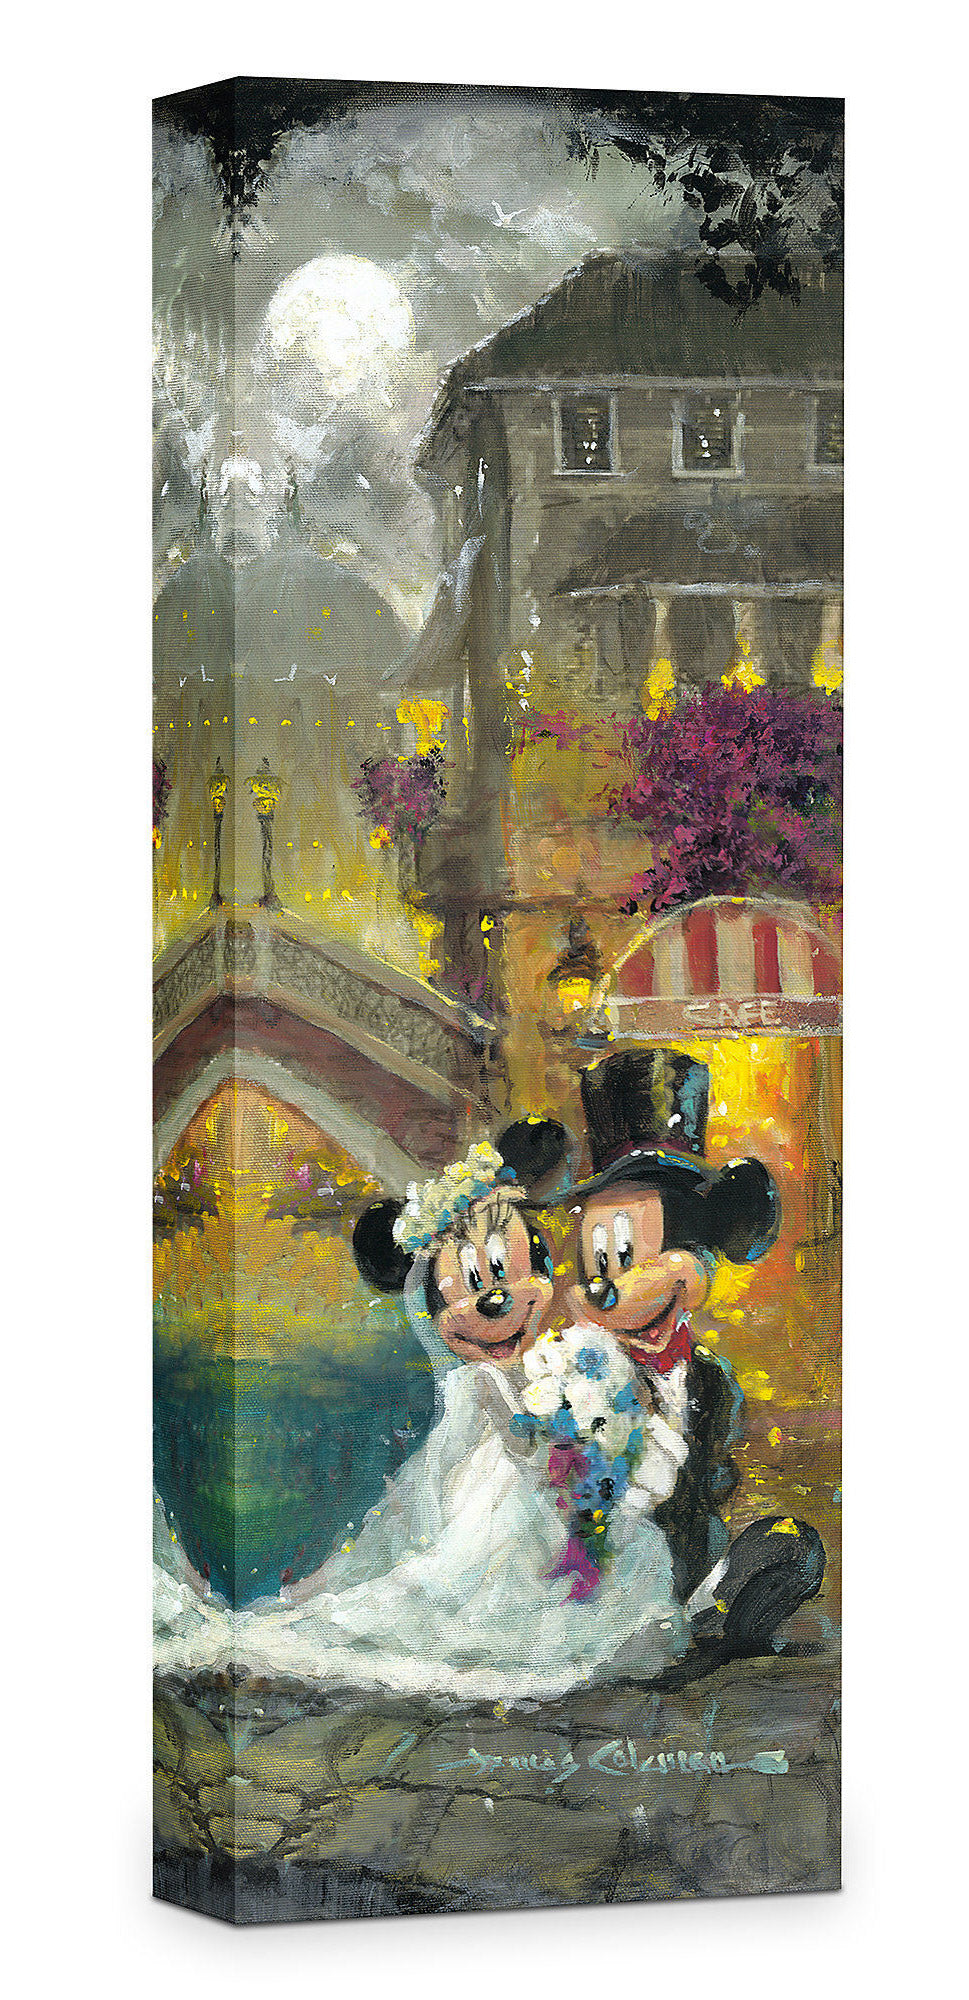 James Coleman Disney "Happy Together" Limited Edition Canvas Giclee